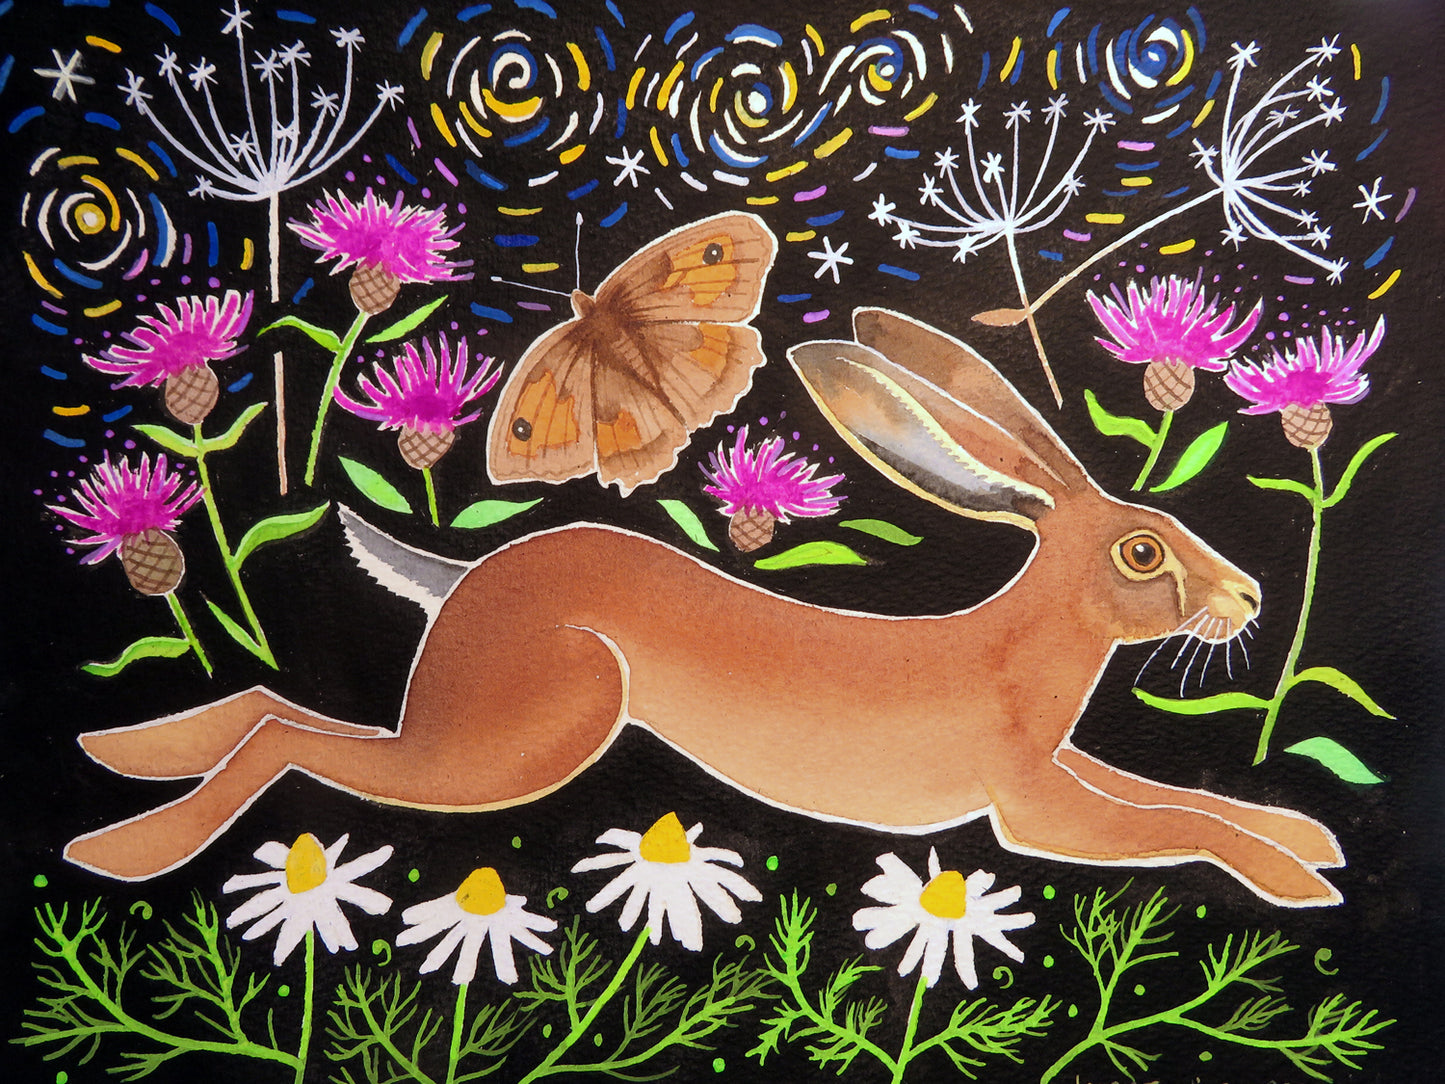 Brown hares greetings cards - choose from 4 designs